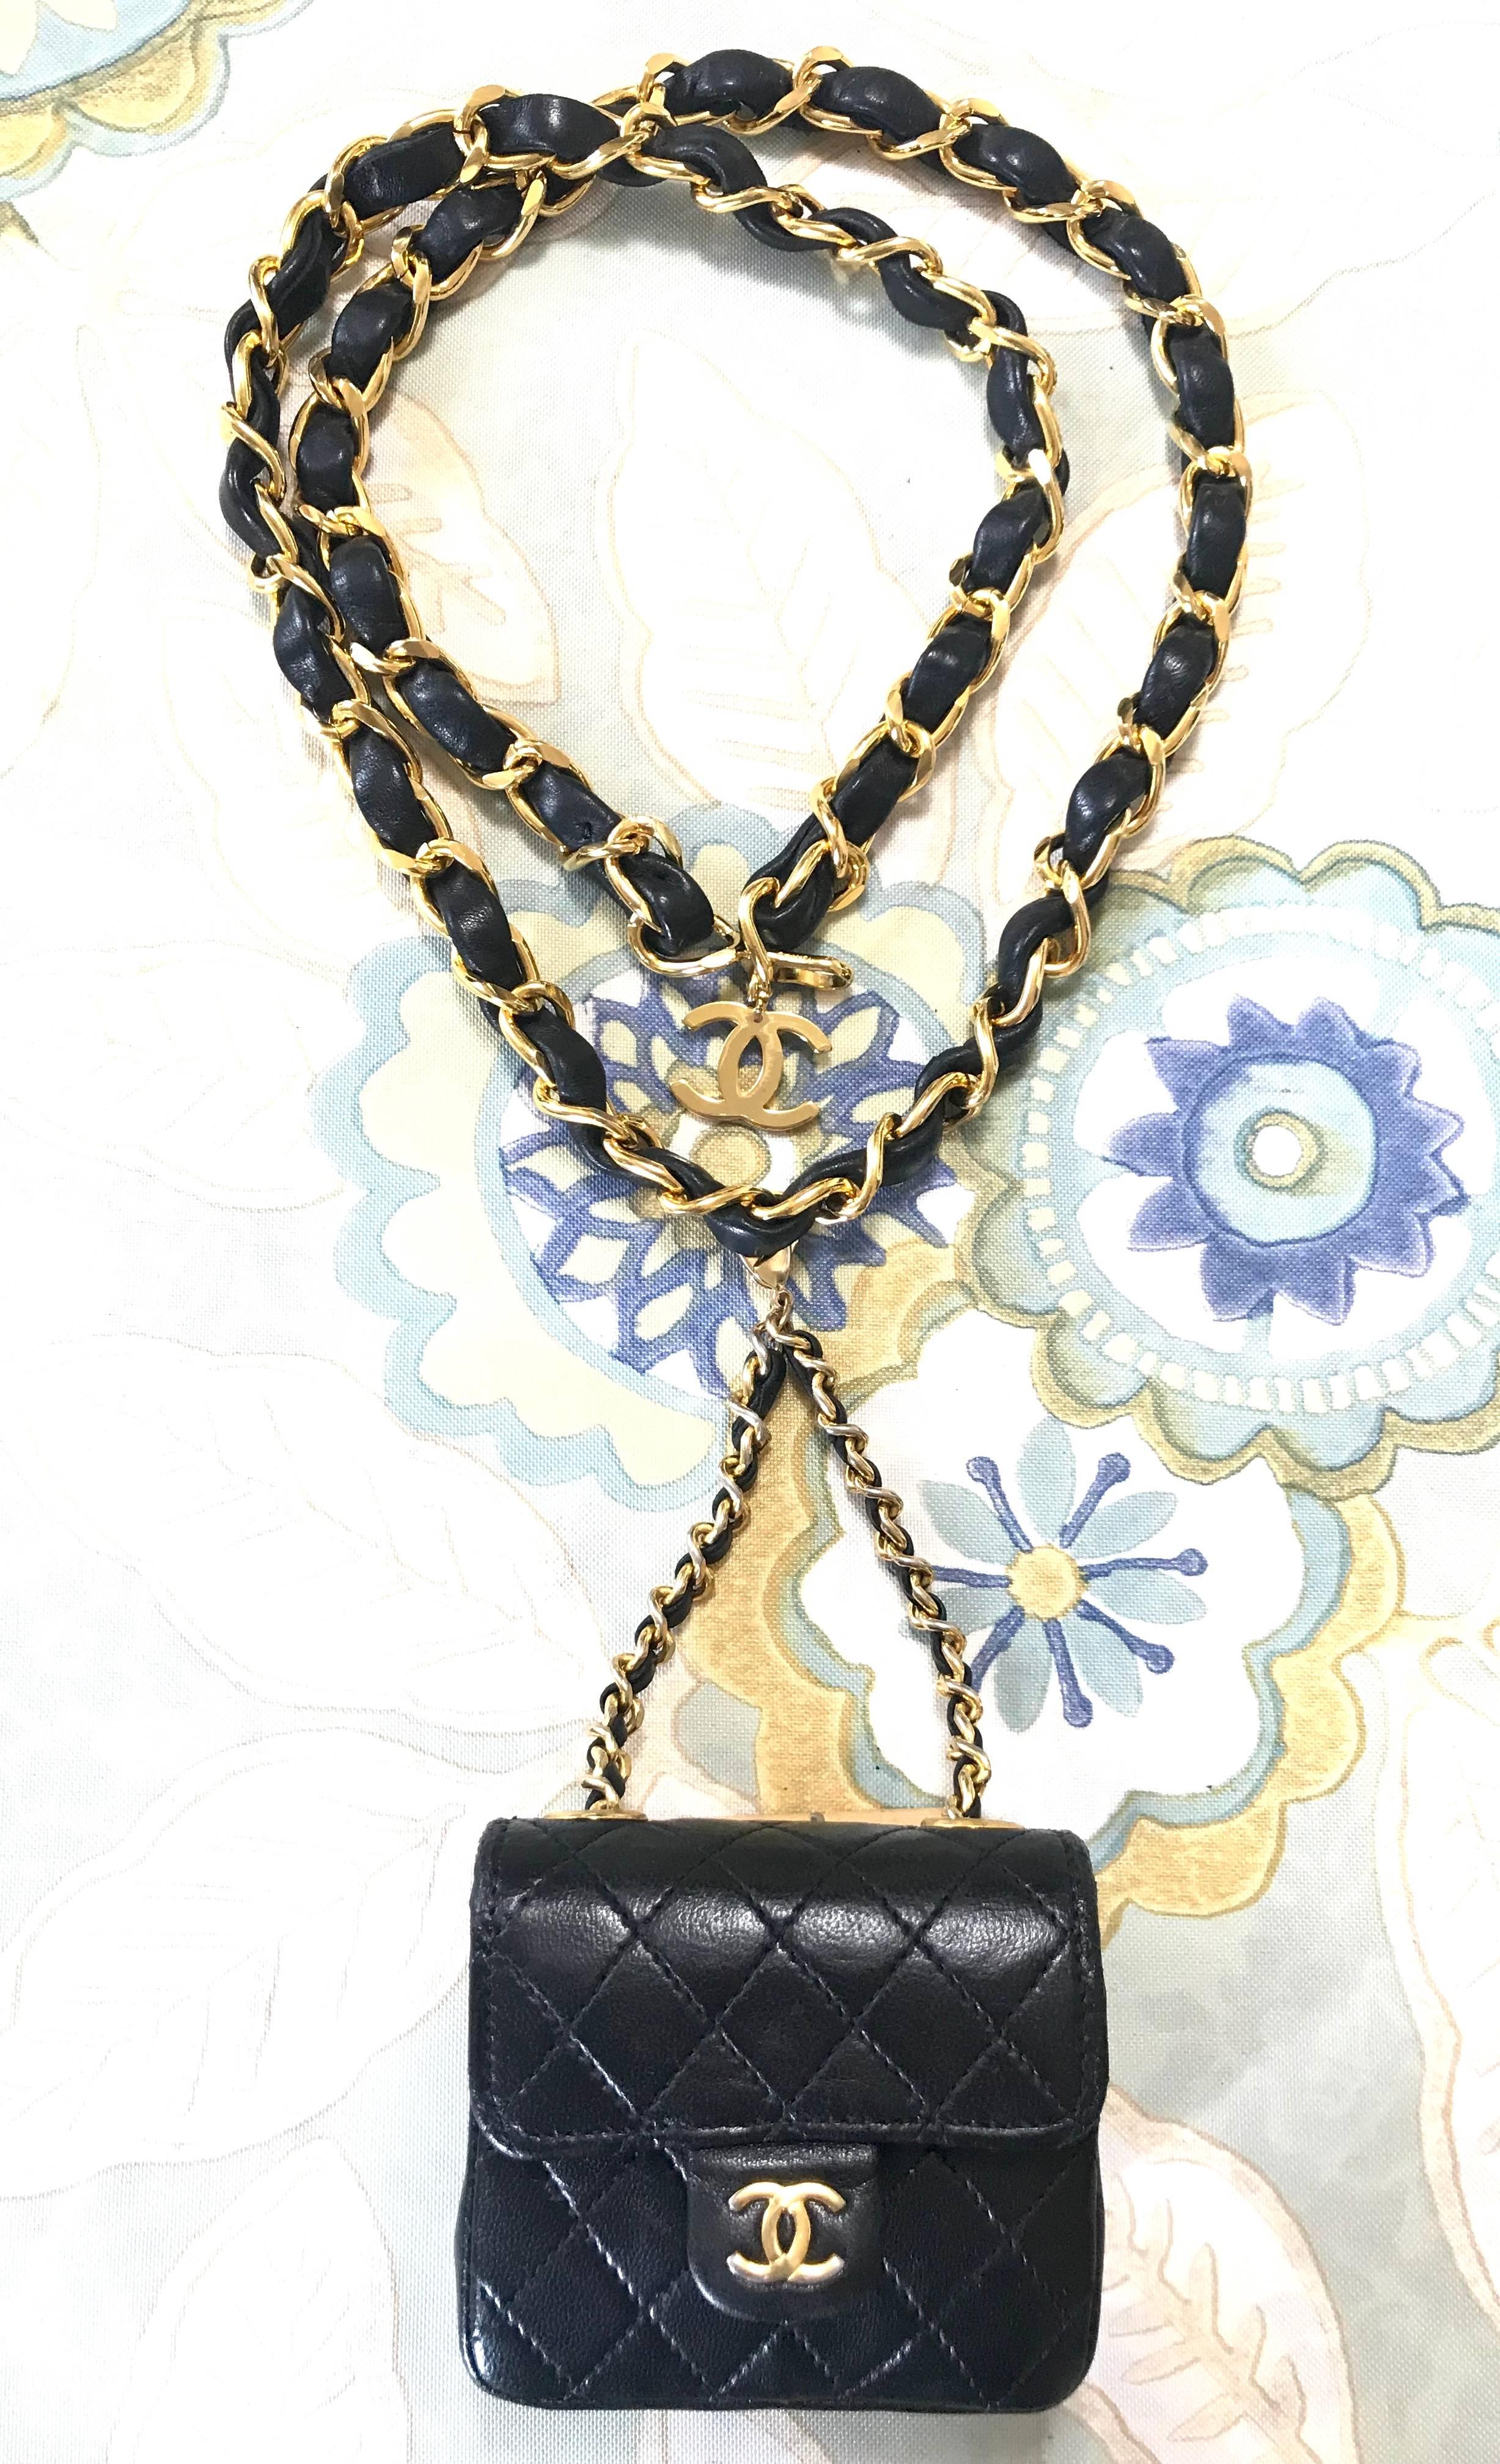 1990s. Vintage CHANEL black lambskin mini 2.55 bag charm chain leather belt with CC motif.

Here is another fabulous piece from CHANEL back in the era of 90's, a black leather golden chain belt with its iconic mini 2.55 bag pouch with CC golden